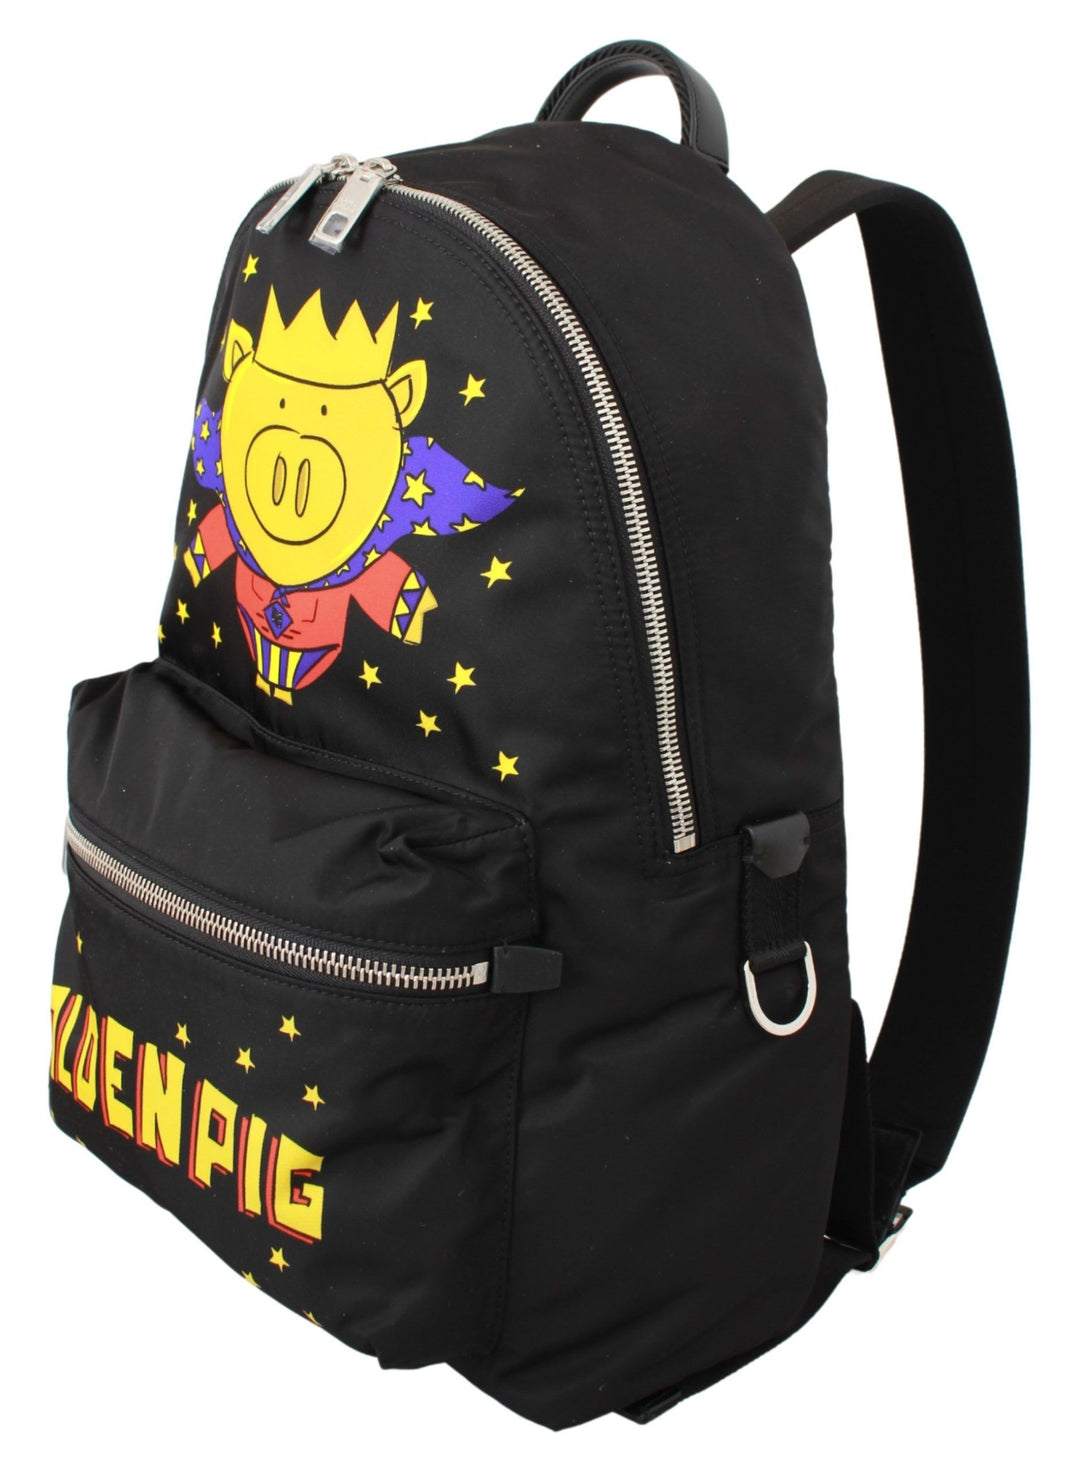 Dolce & Gabbana Black Golden Pig of the Year School Backpack